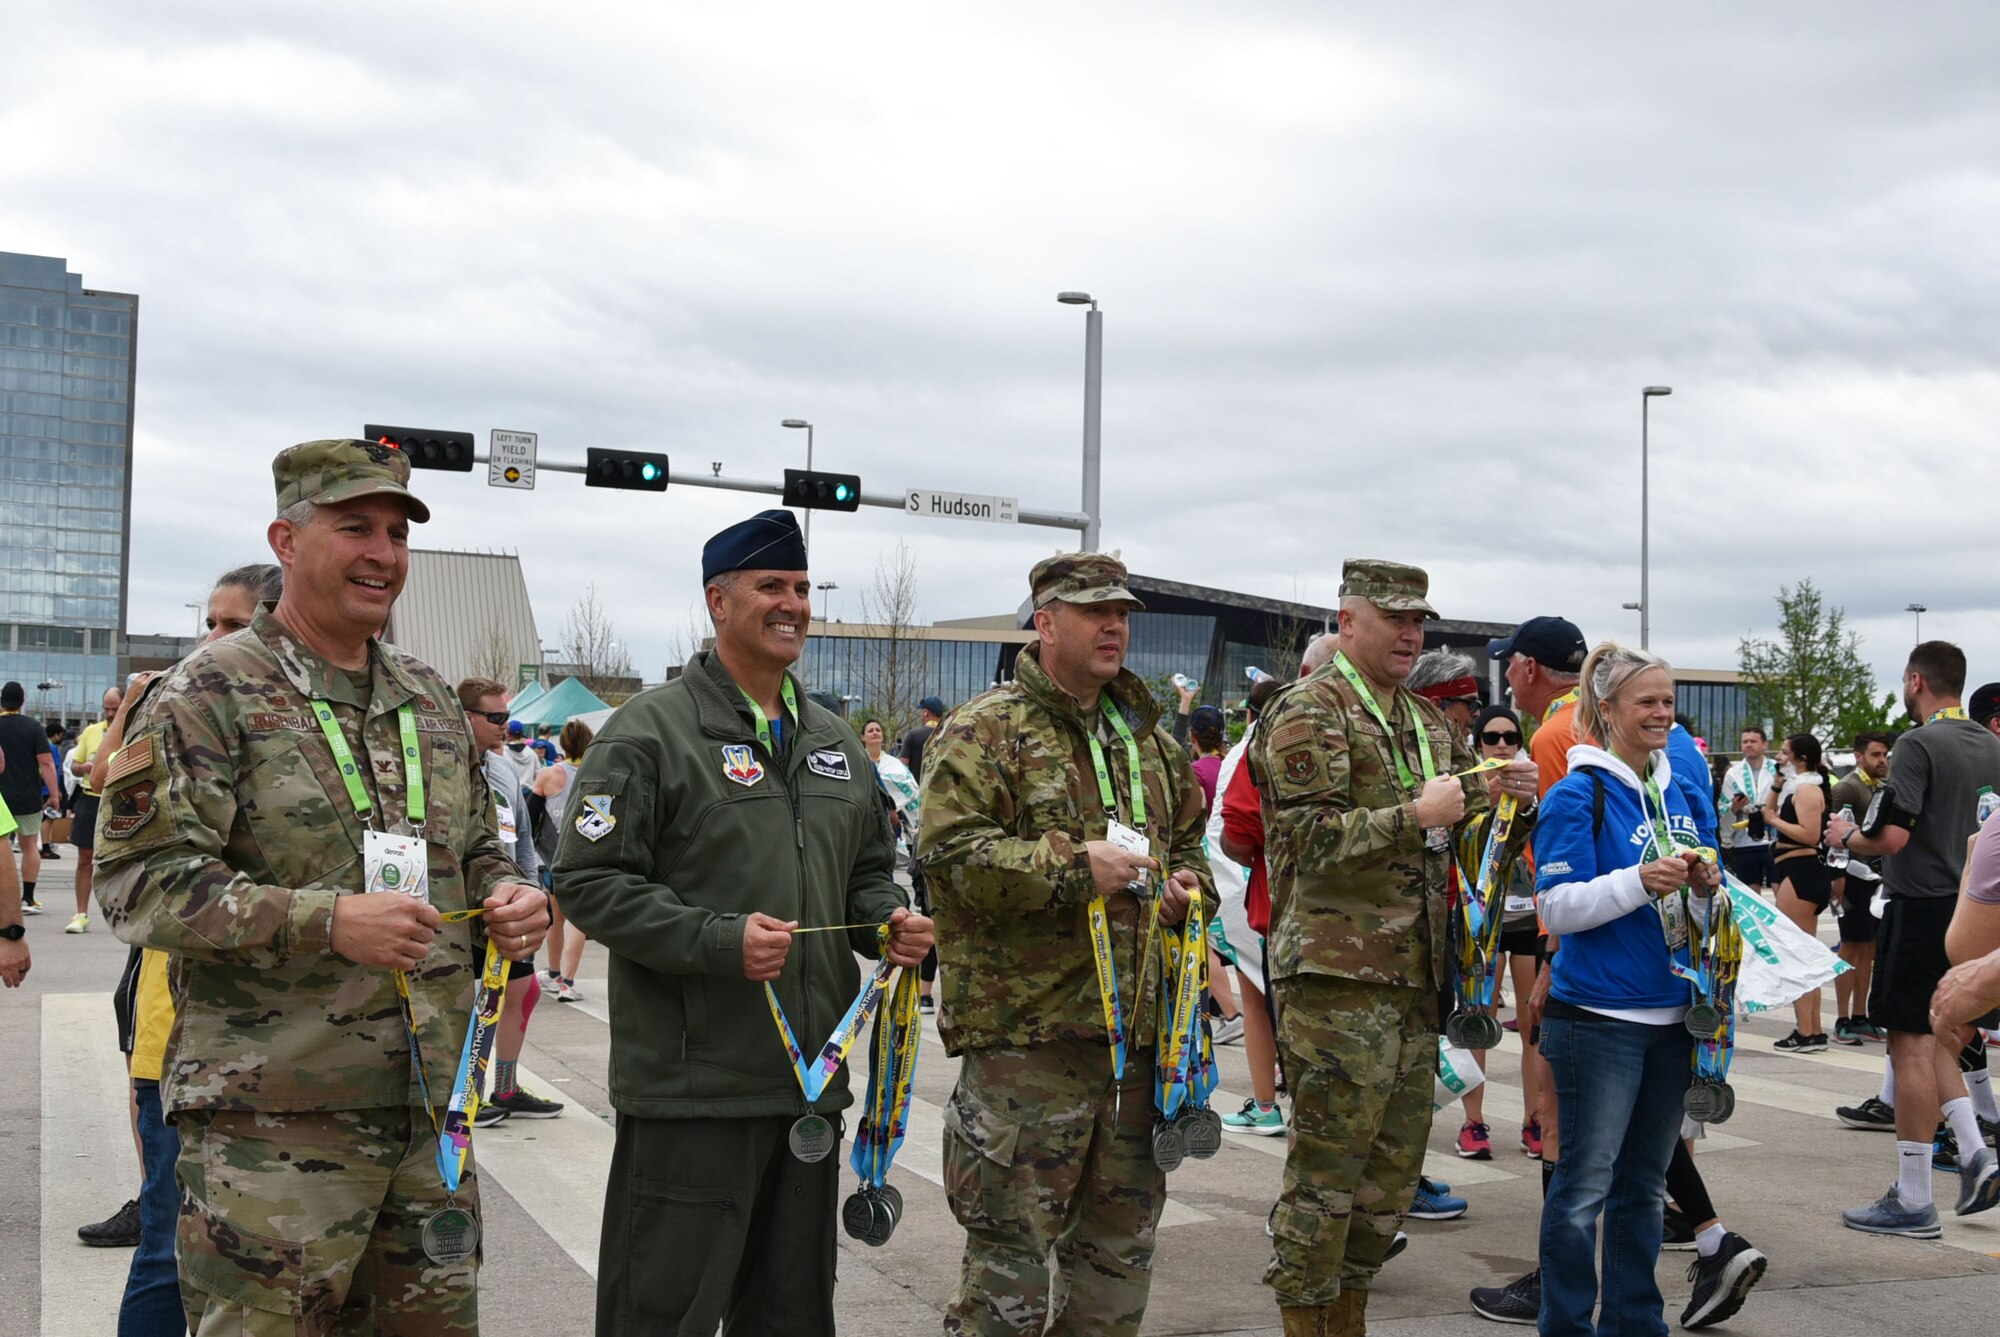 Tinker Air Force Base senior leaders handed out medals to runners at the finish line of the Oklahoma City Memorial Marathon April 24, 2022.